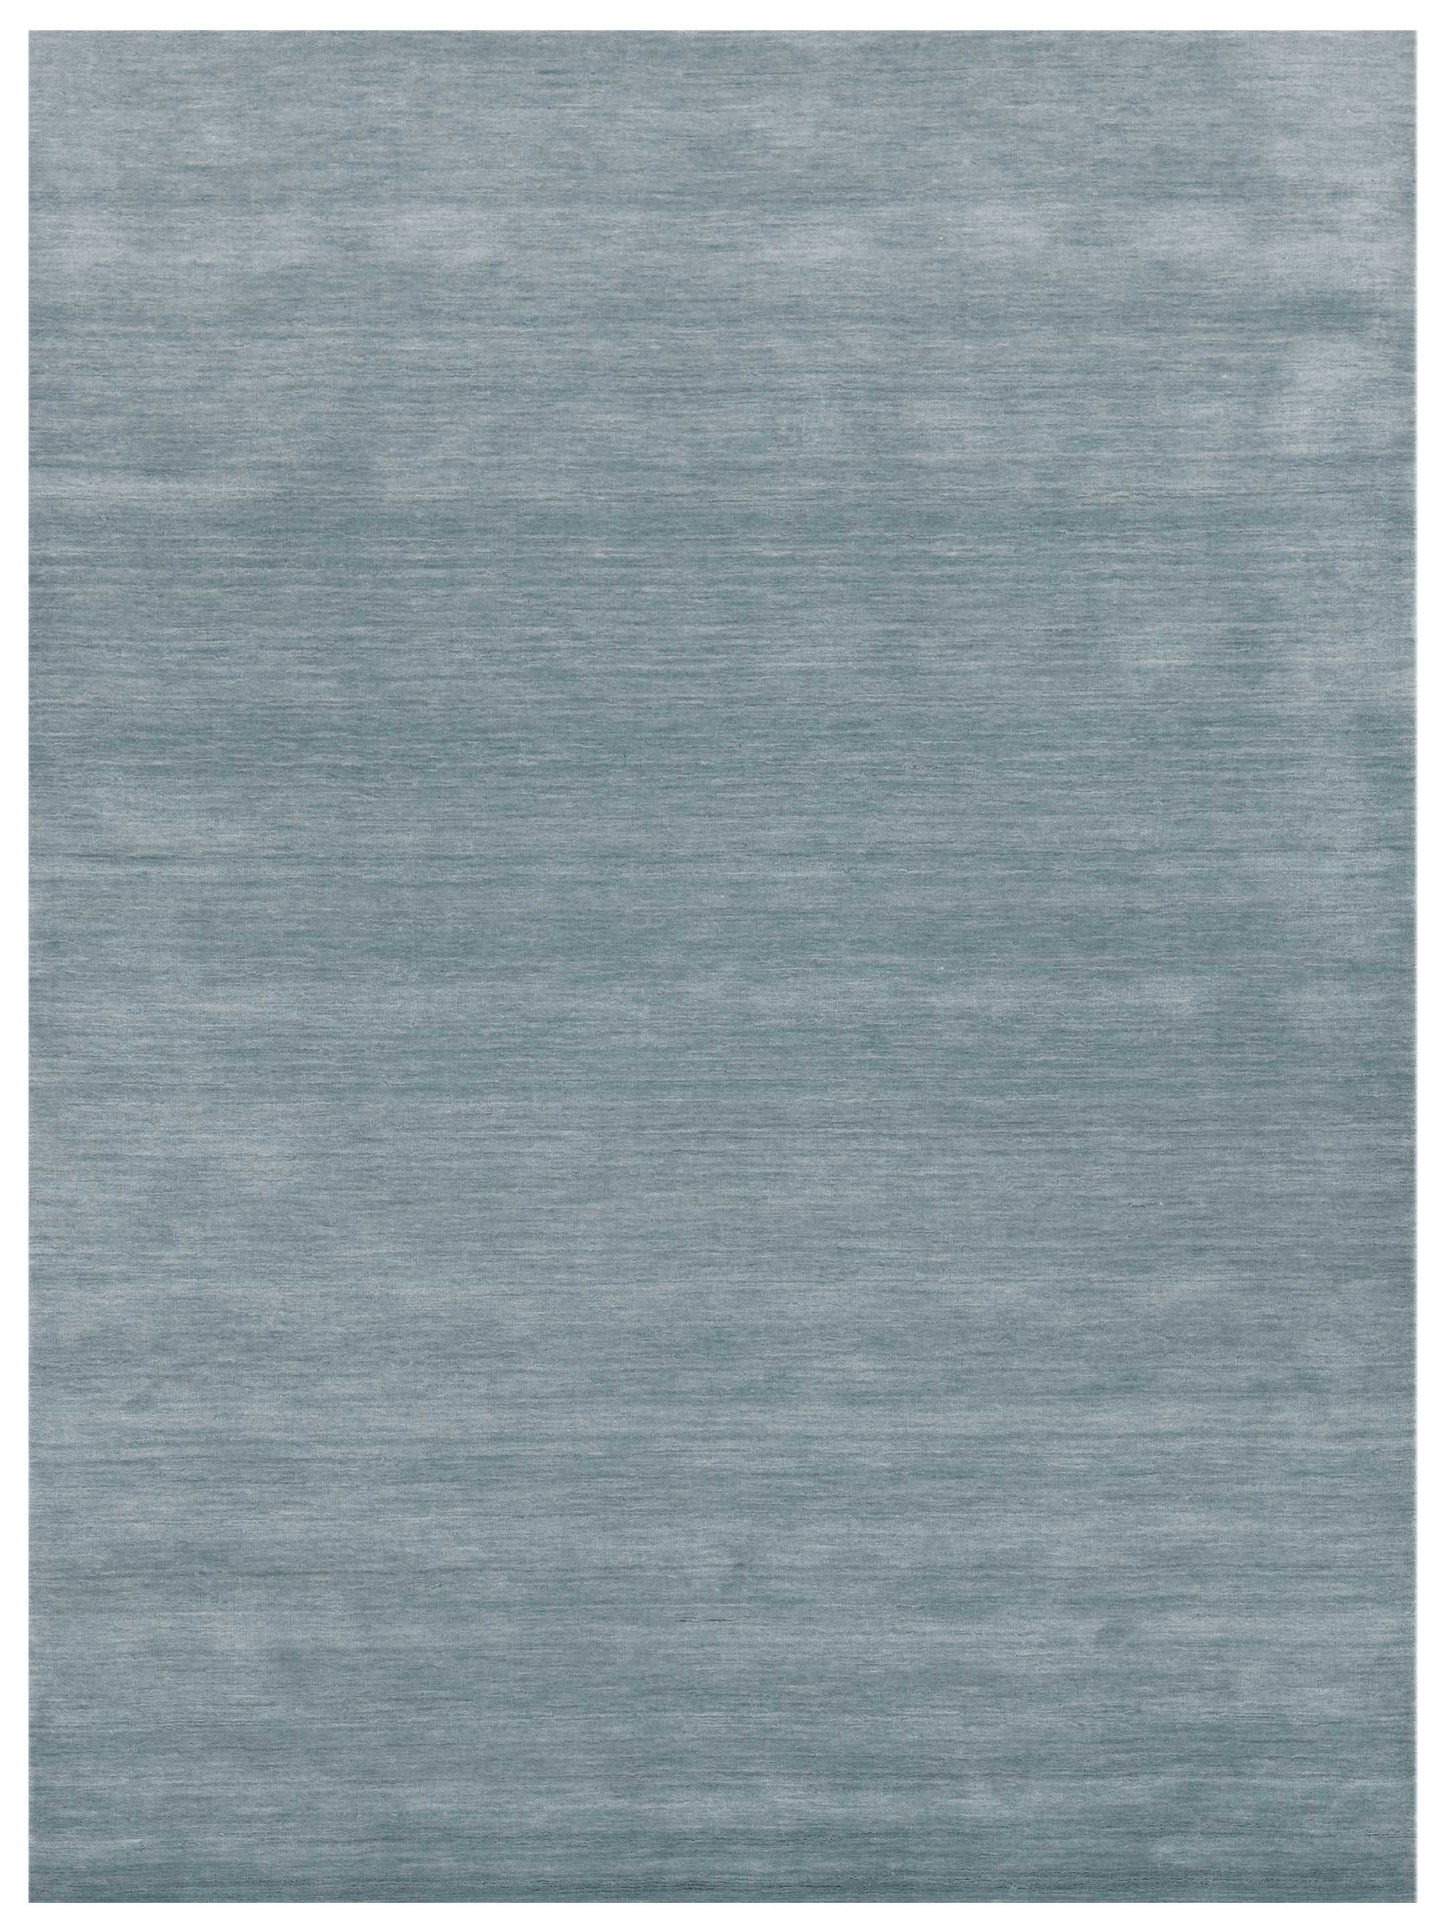 Limited ARMIDALE ARM-304 POLO BLUE Transitional Woven Rug